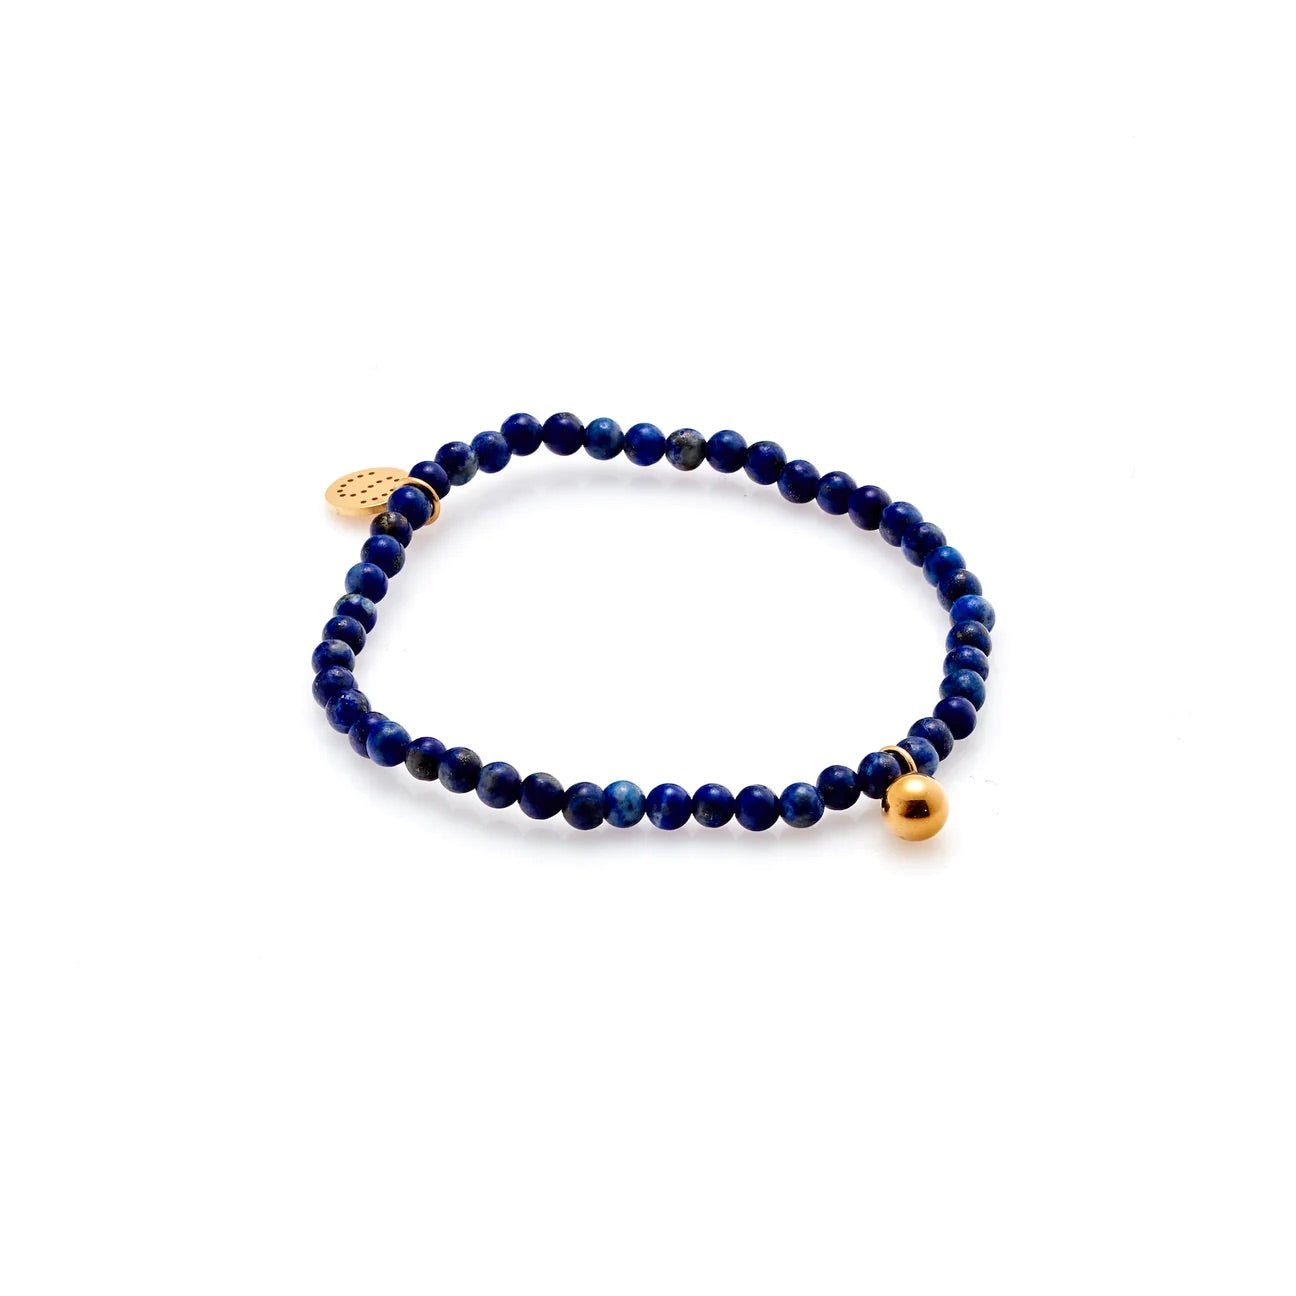 Riveria Blue Bracelet Stack By Silk and Steel - Turq/Blue lapis/Gold